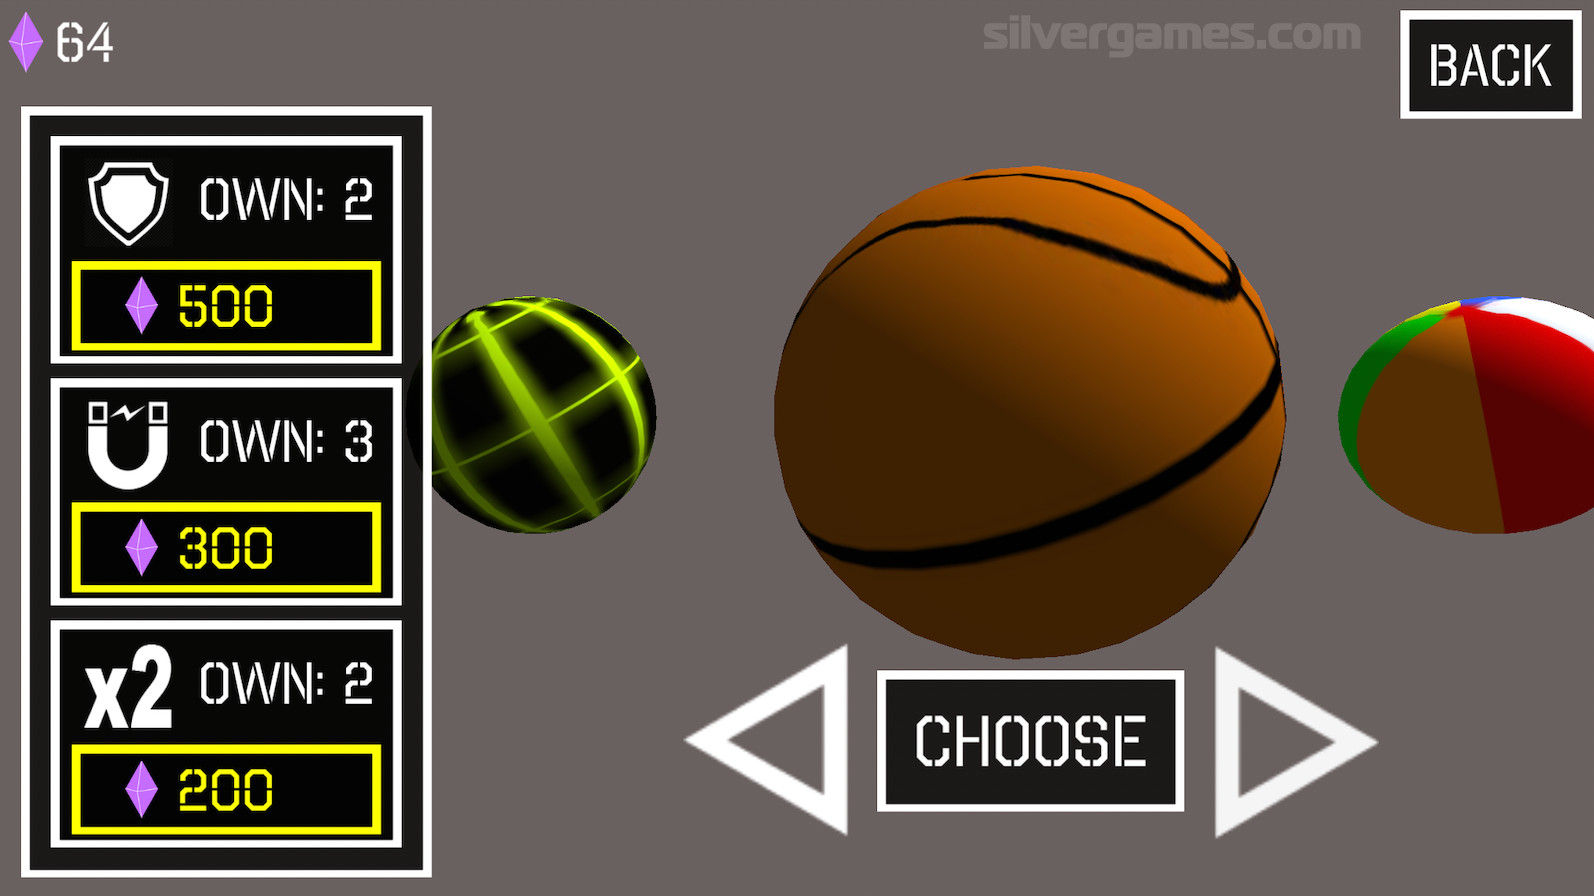 Mind Games for 2 Player - Play Online on SilverGames 🕹️